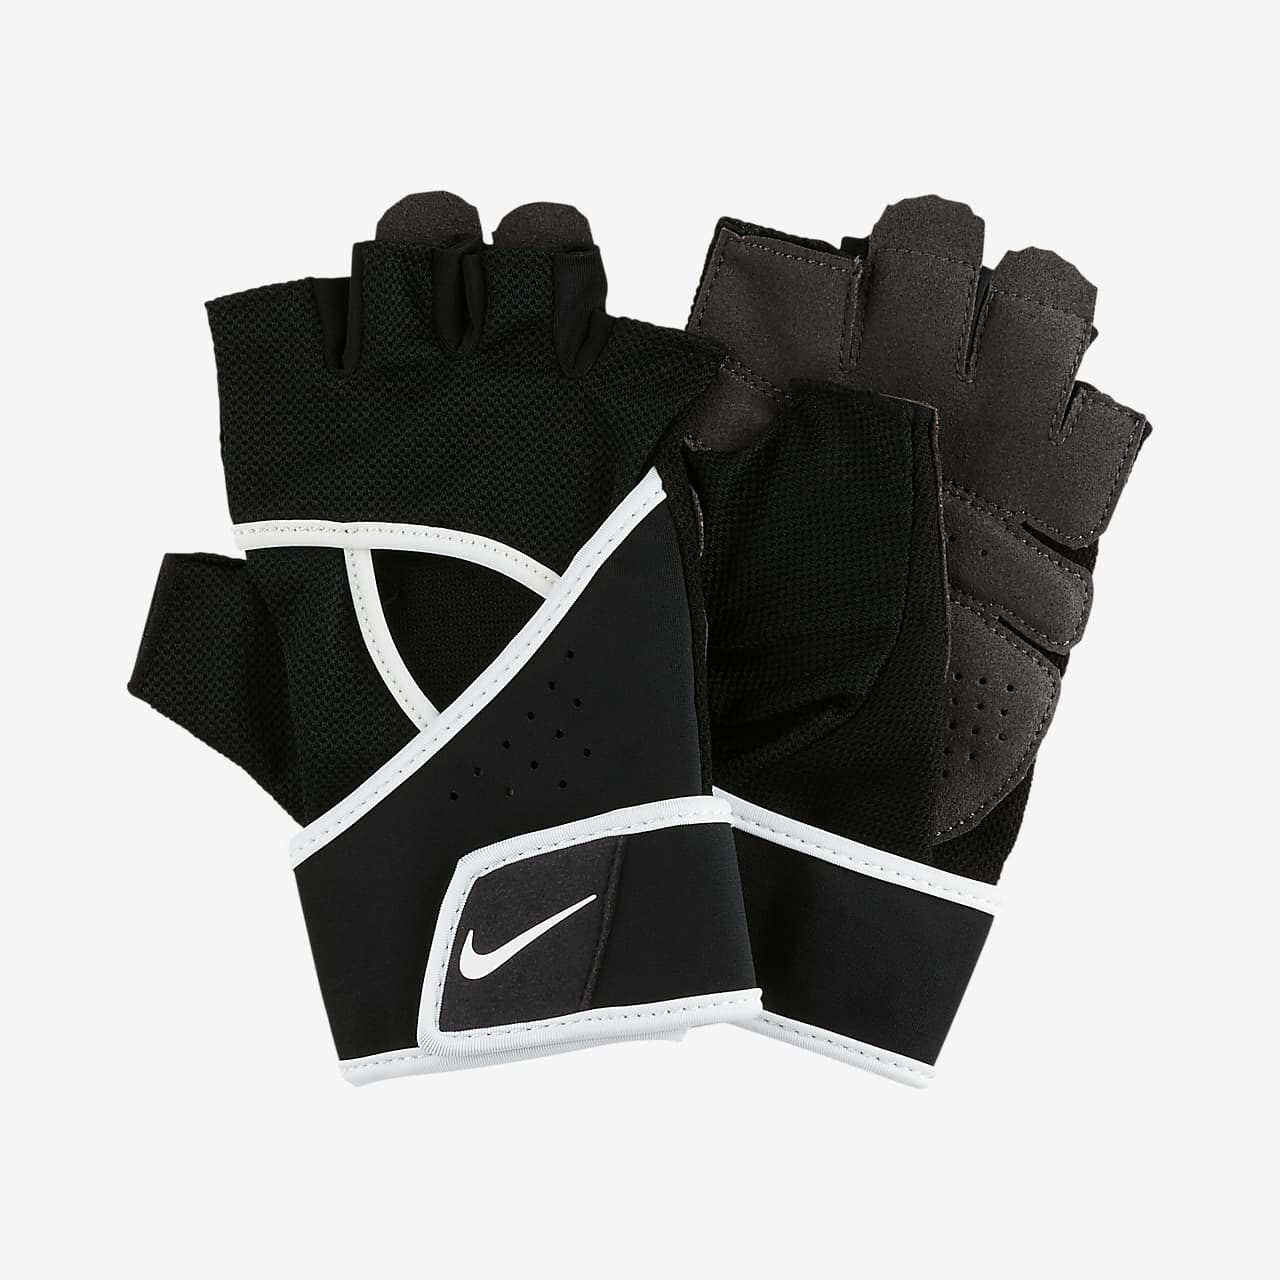 Plumber Above head and shoulder Exceed Nike Gym Premium Women's Training Gloves. Nike.com